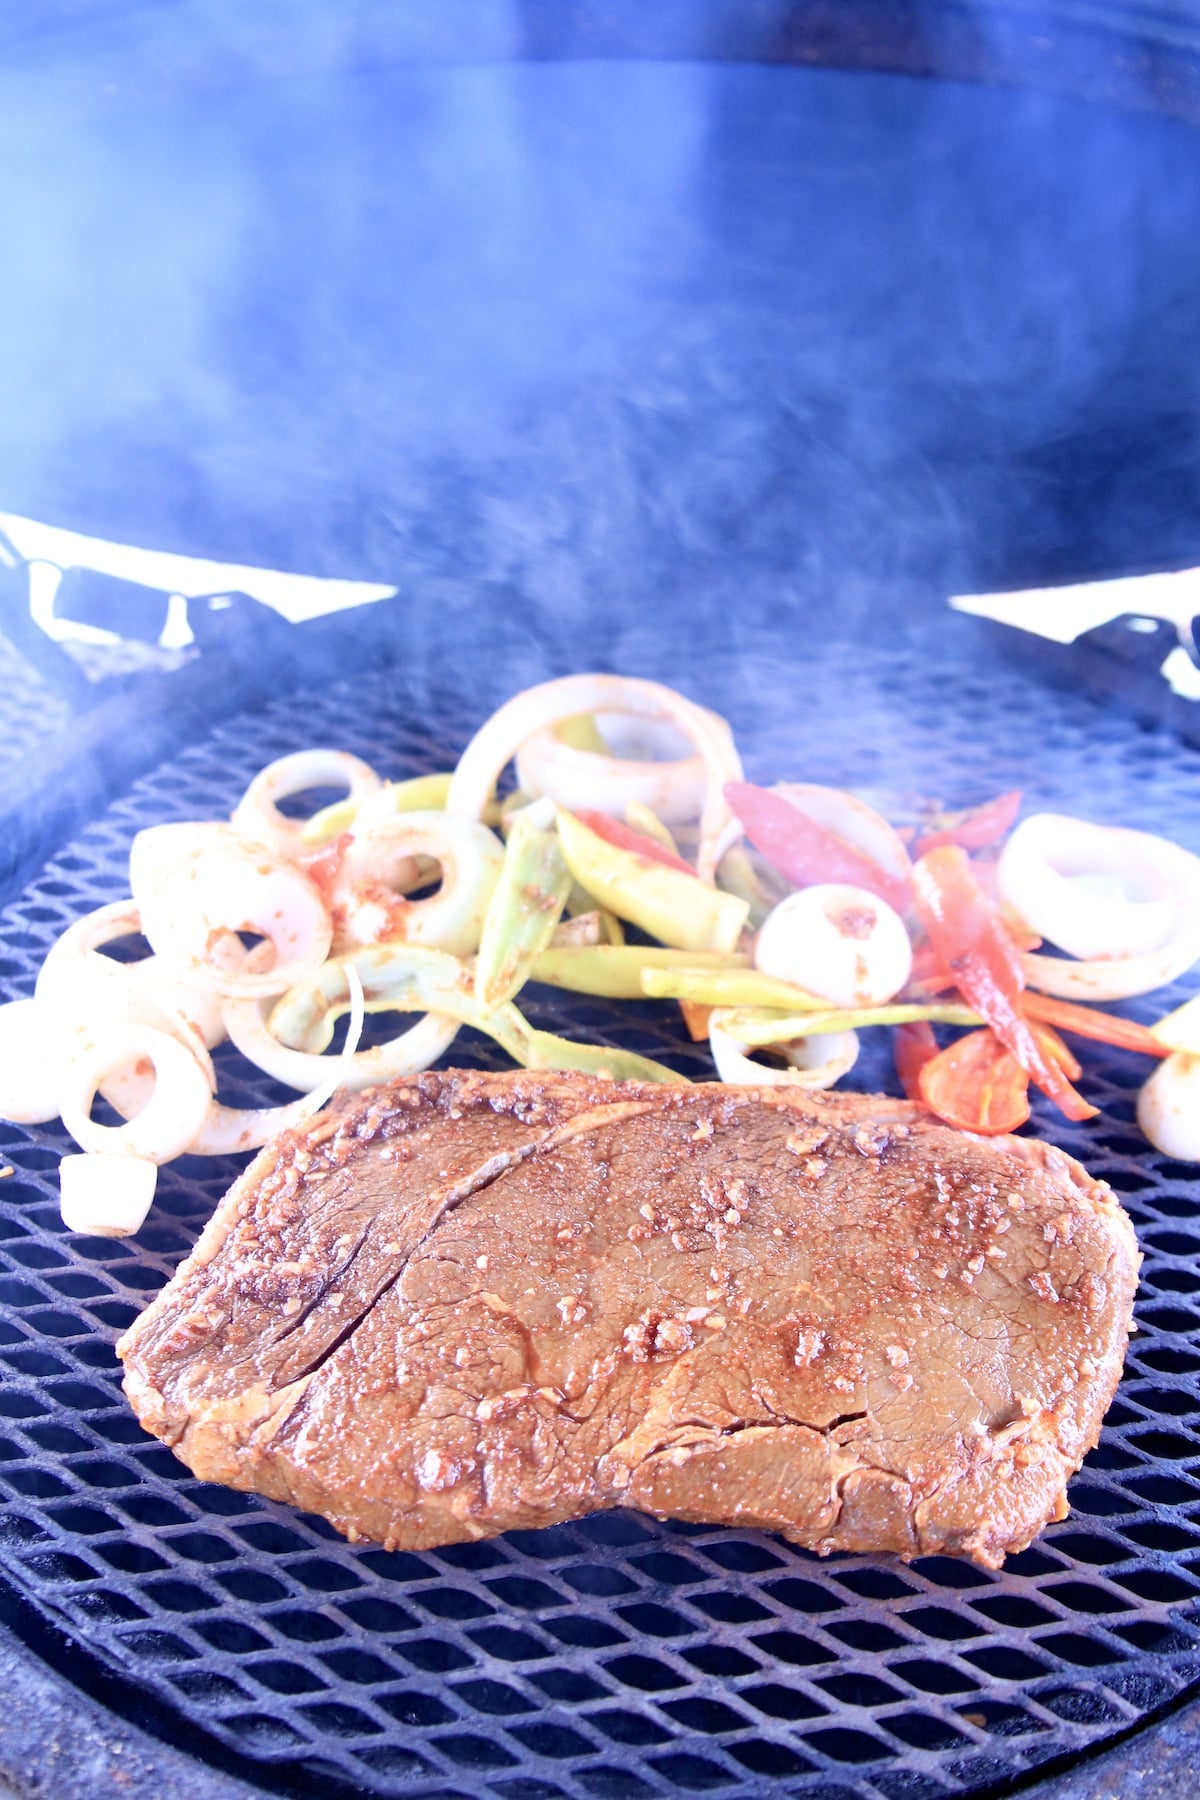 Grilling sirloin steak with peppers and onions.